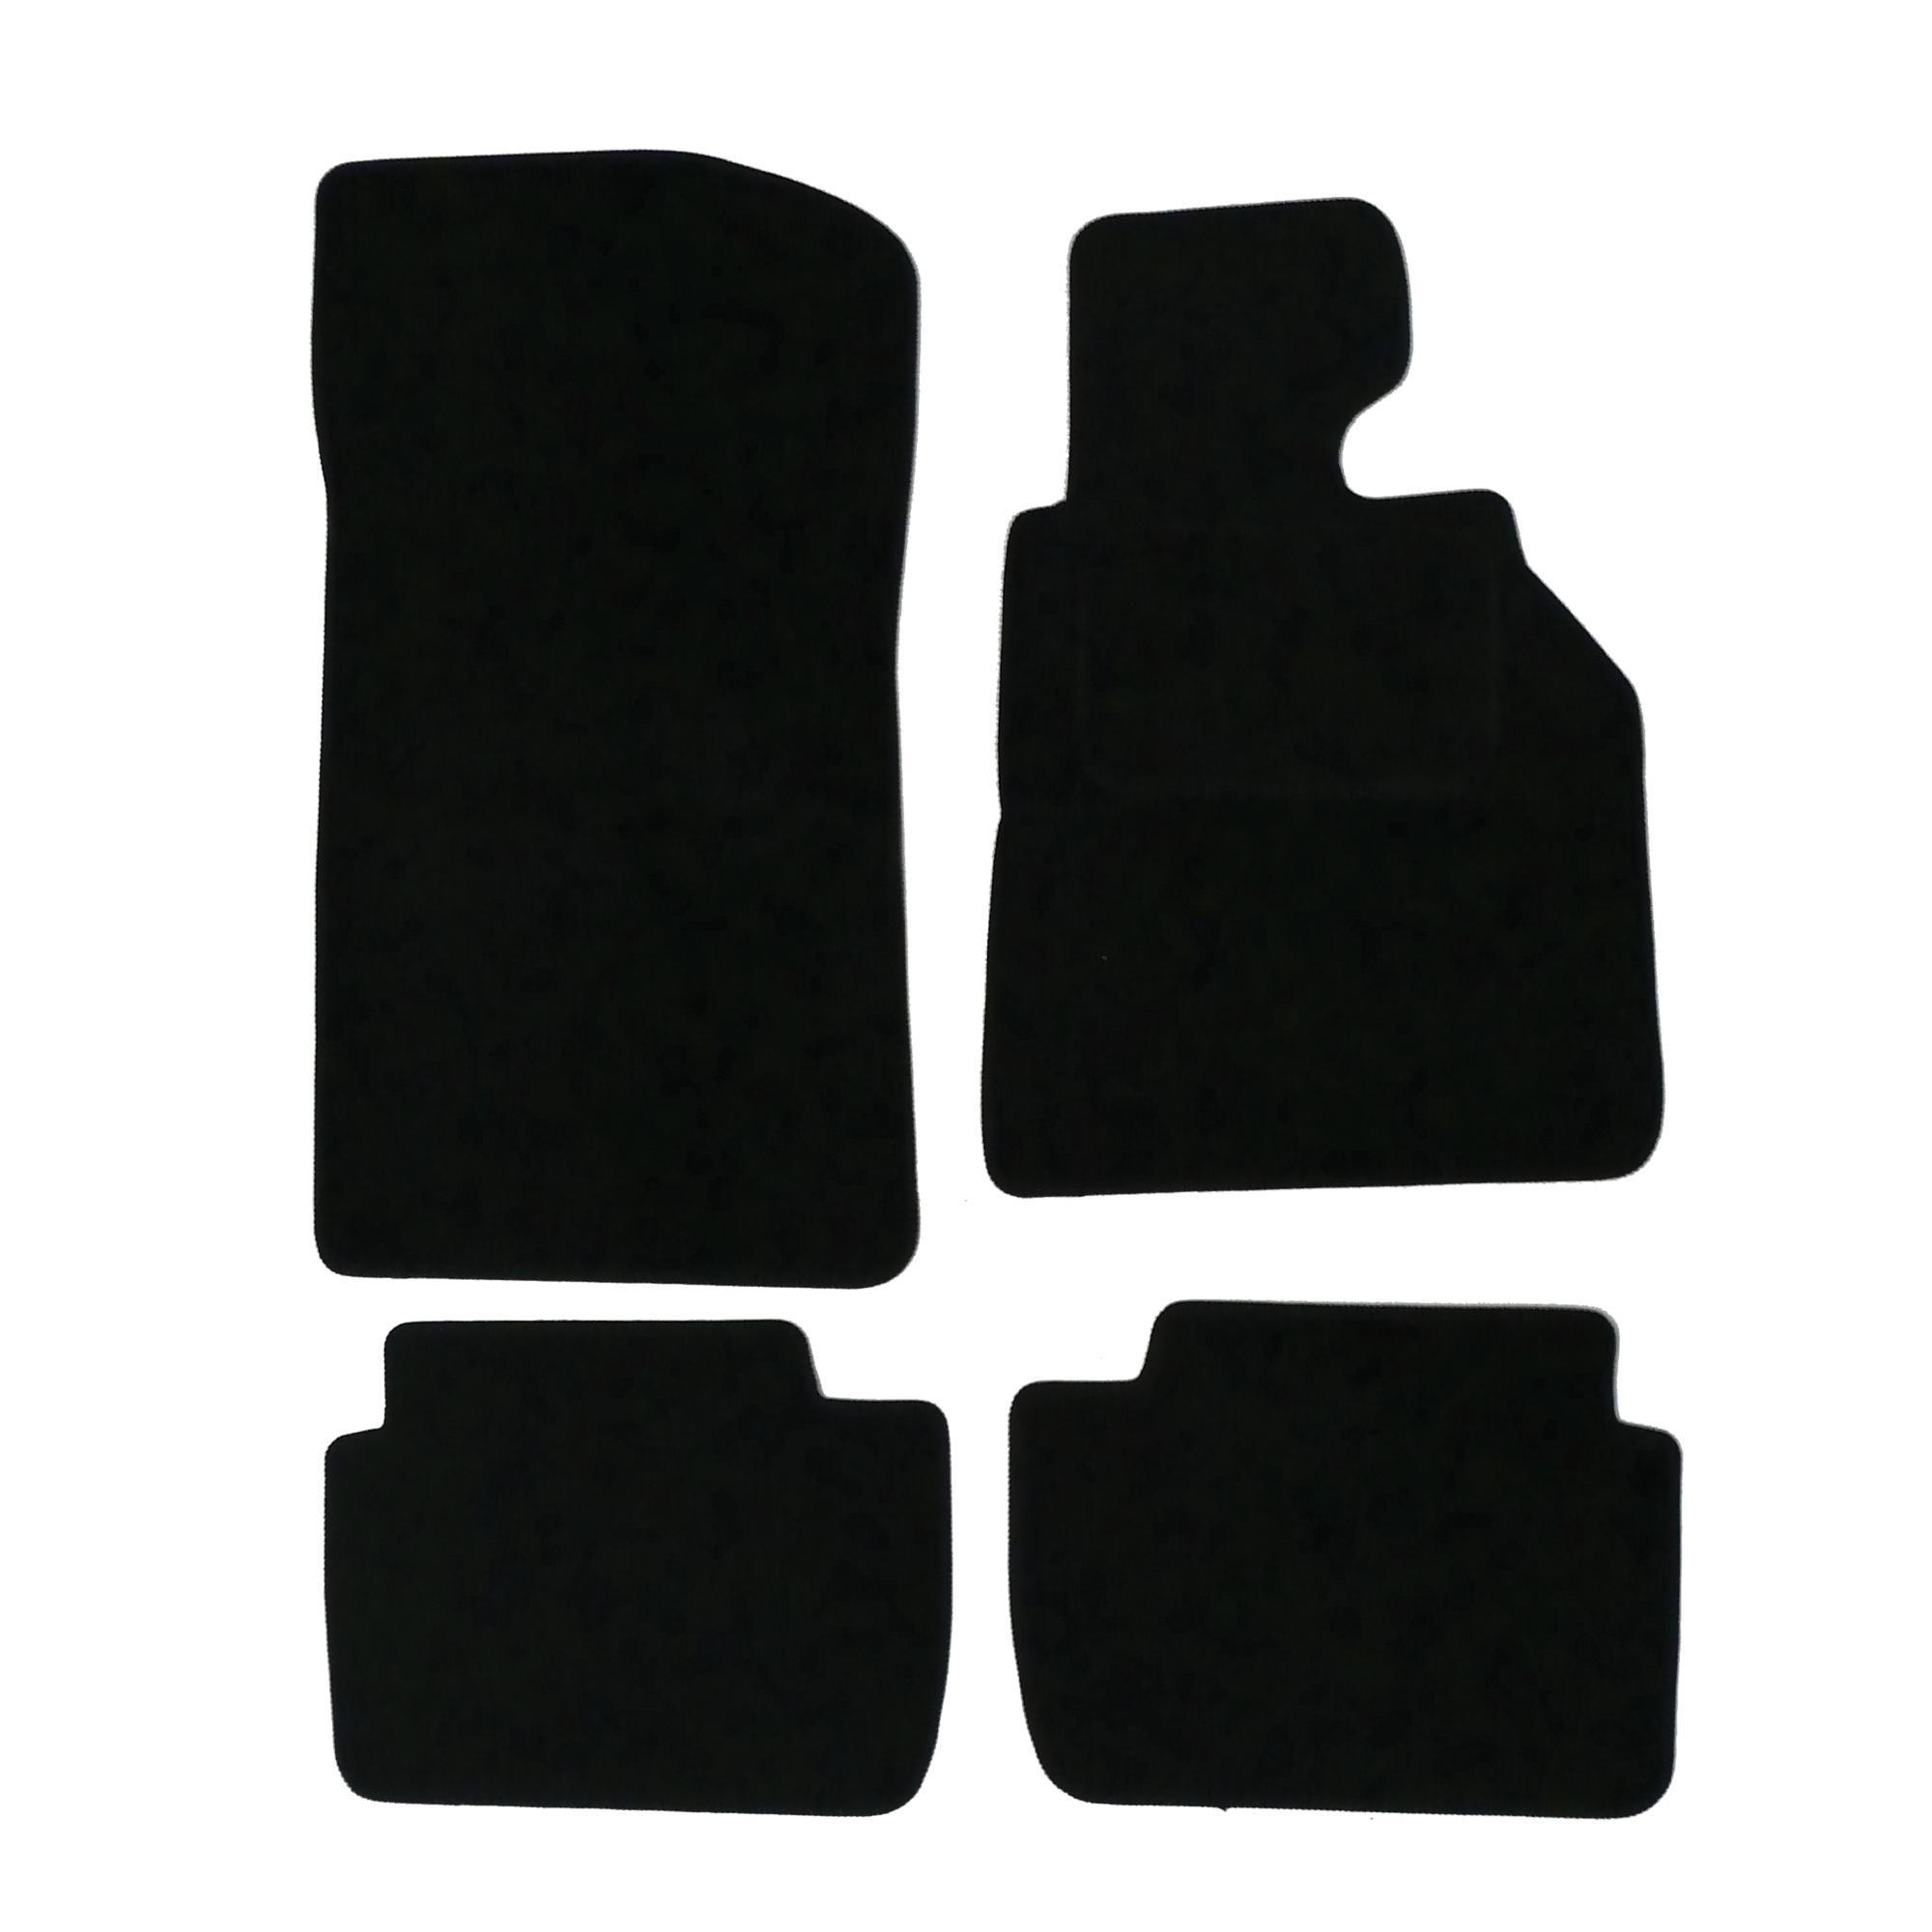 Halfords (Ss1180) Bmw E46 3 Series Coupe Car Mats (98-05) Blk